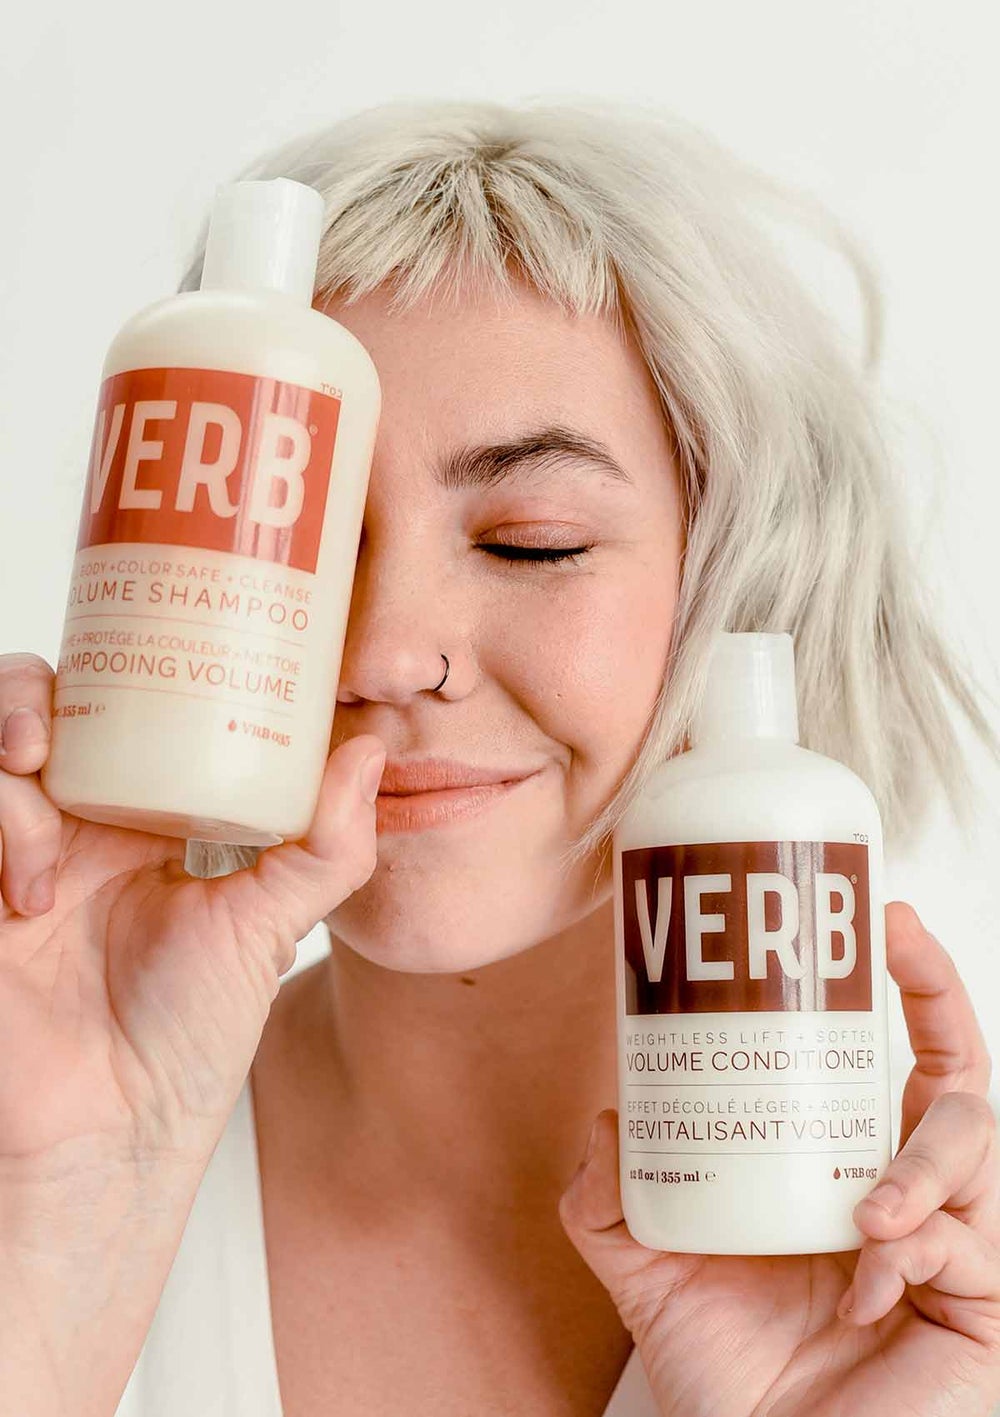 Verb - Volume Shampoo Full Body + Color Safe + Cleanse |12 oz| - by Verb |ProCare Outlet|